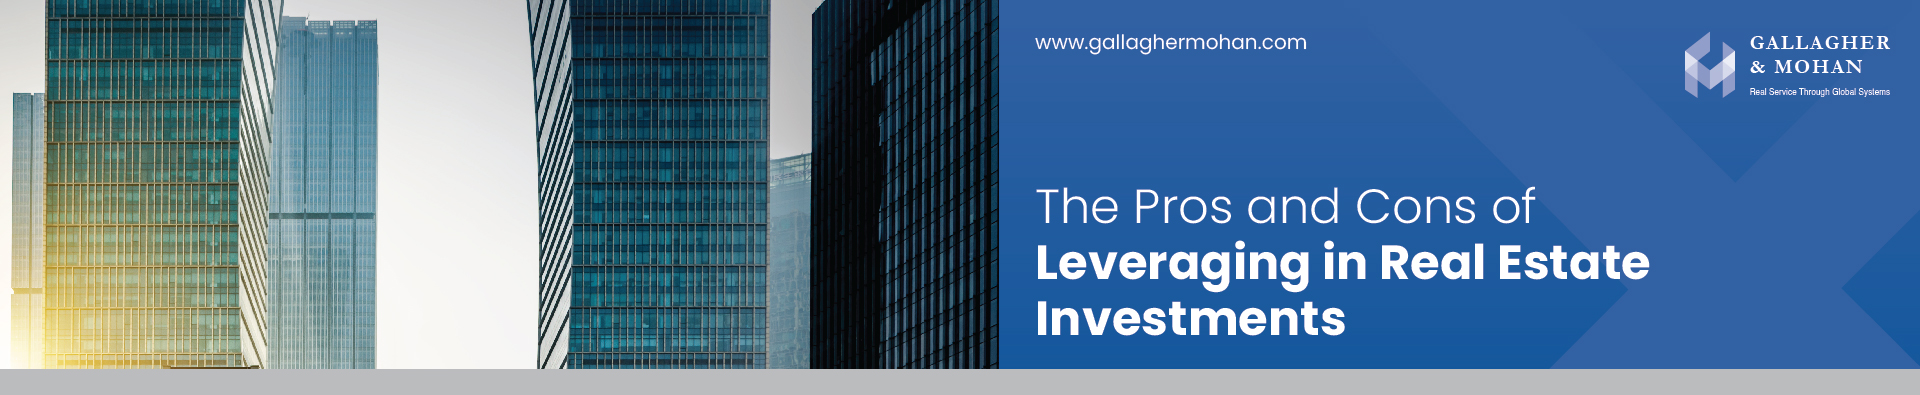 The Pros And Cons Of Leveraging In Real Estate Investments